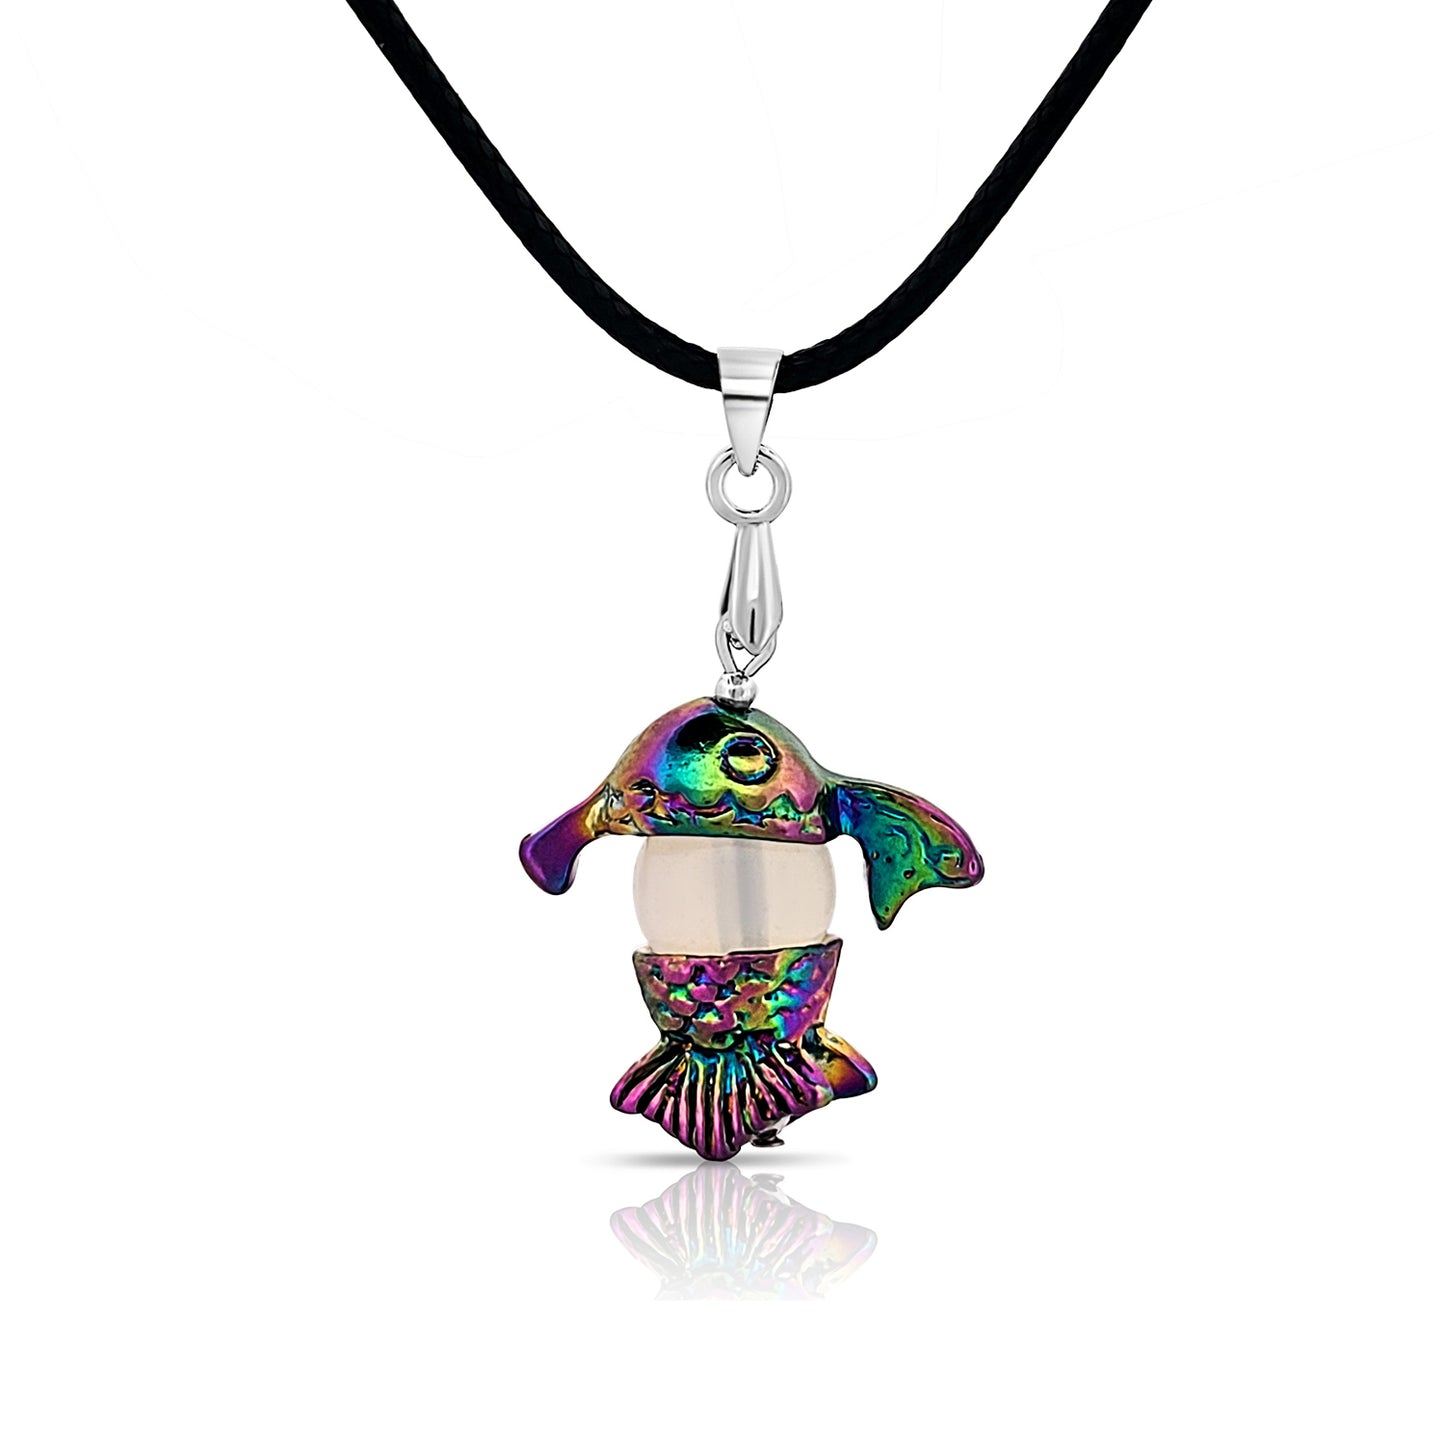 BESHEEK Rainbow Electroplate and Opalite Fish Dangle Pendant Necklace | Hypoallergenic Boho Kitchsy Artistic Animal Cute Style Fashion Necklace